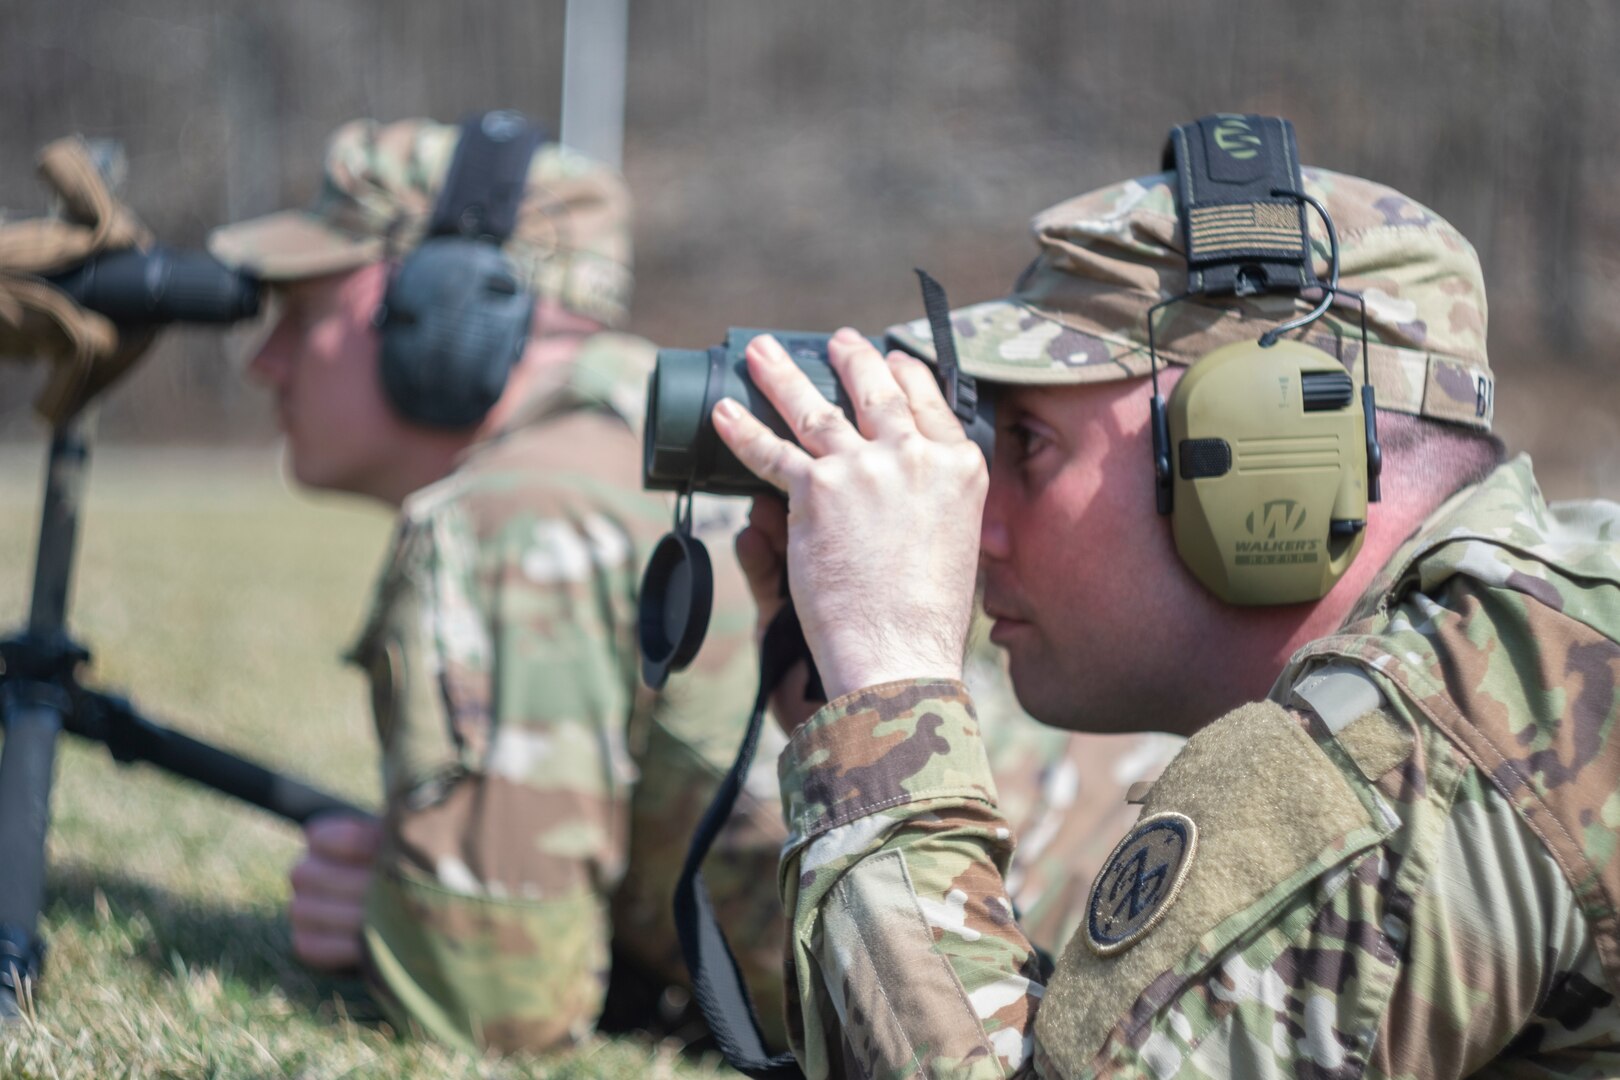 U.S. Army Staff Sgt. Ryan Brum, a squad leader assigned to Charlie Company, 1st Battalion, 182nd Infantry Regiment, uses a pair of binoculars to view a competitor target during the 2024 Logan-Duffy Marksmanship Competition at Camp Smith Training Site in Peekskill, New York, March 13, 2024. The Logan-Duffy Marksmanship Competition is an annual shooting match between 1st Battalion, 69th Infantry Regiment, and 1st Battalion, 182nd Infantry Regiment.